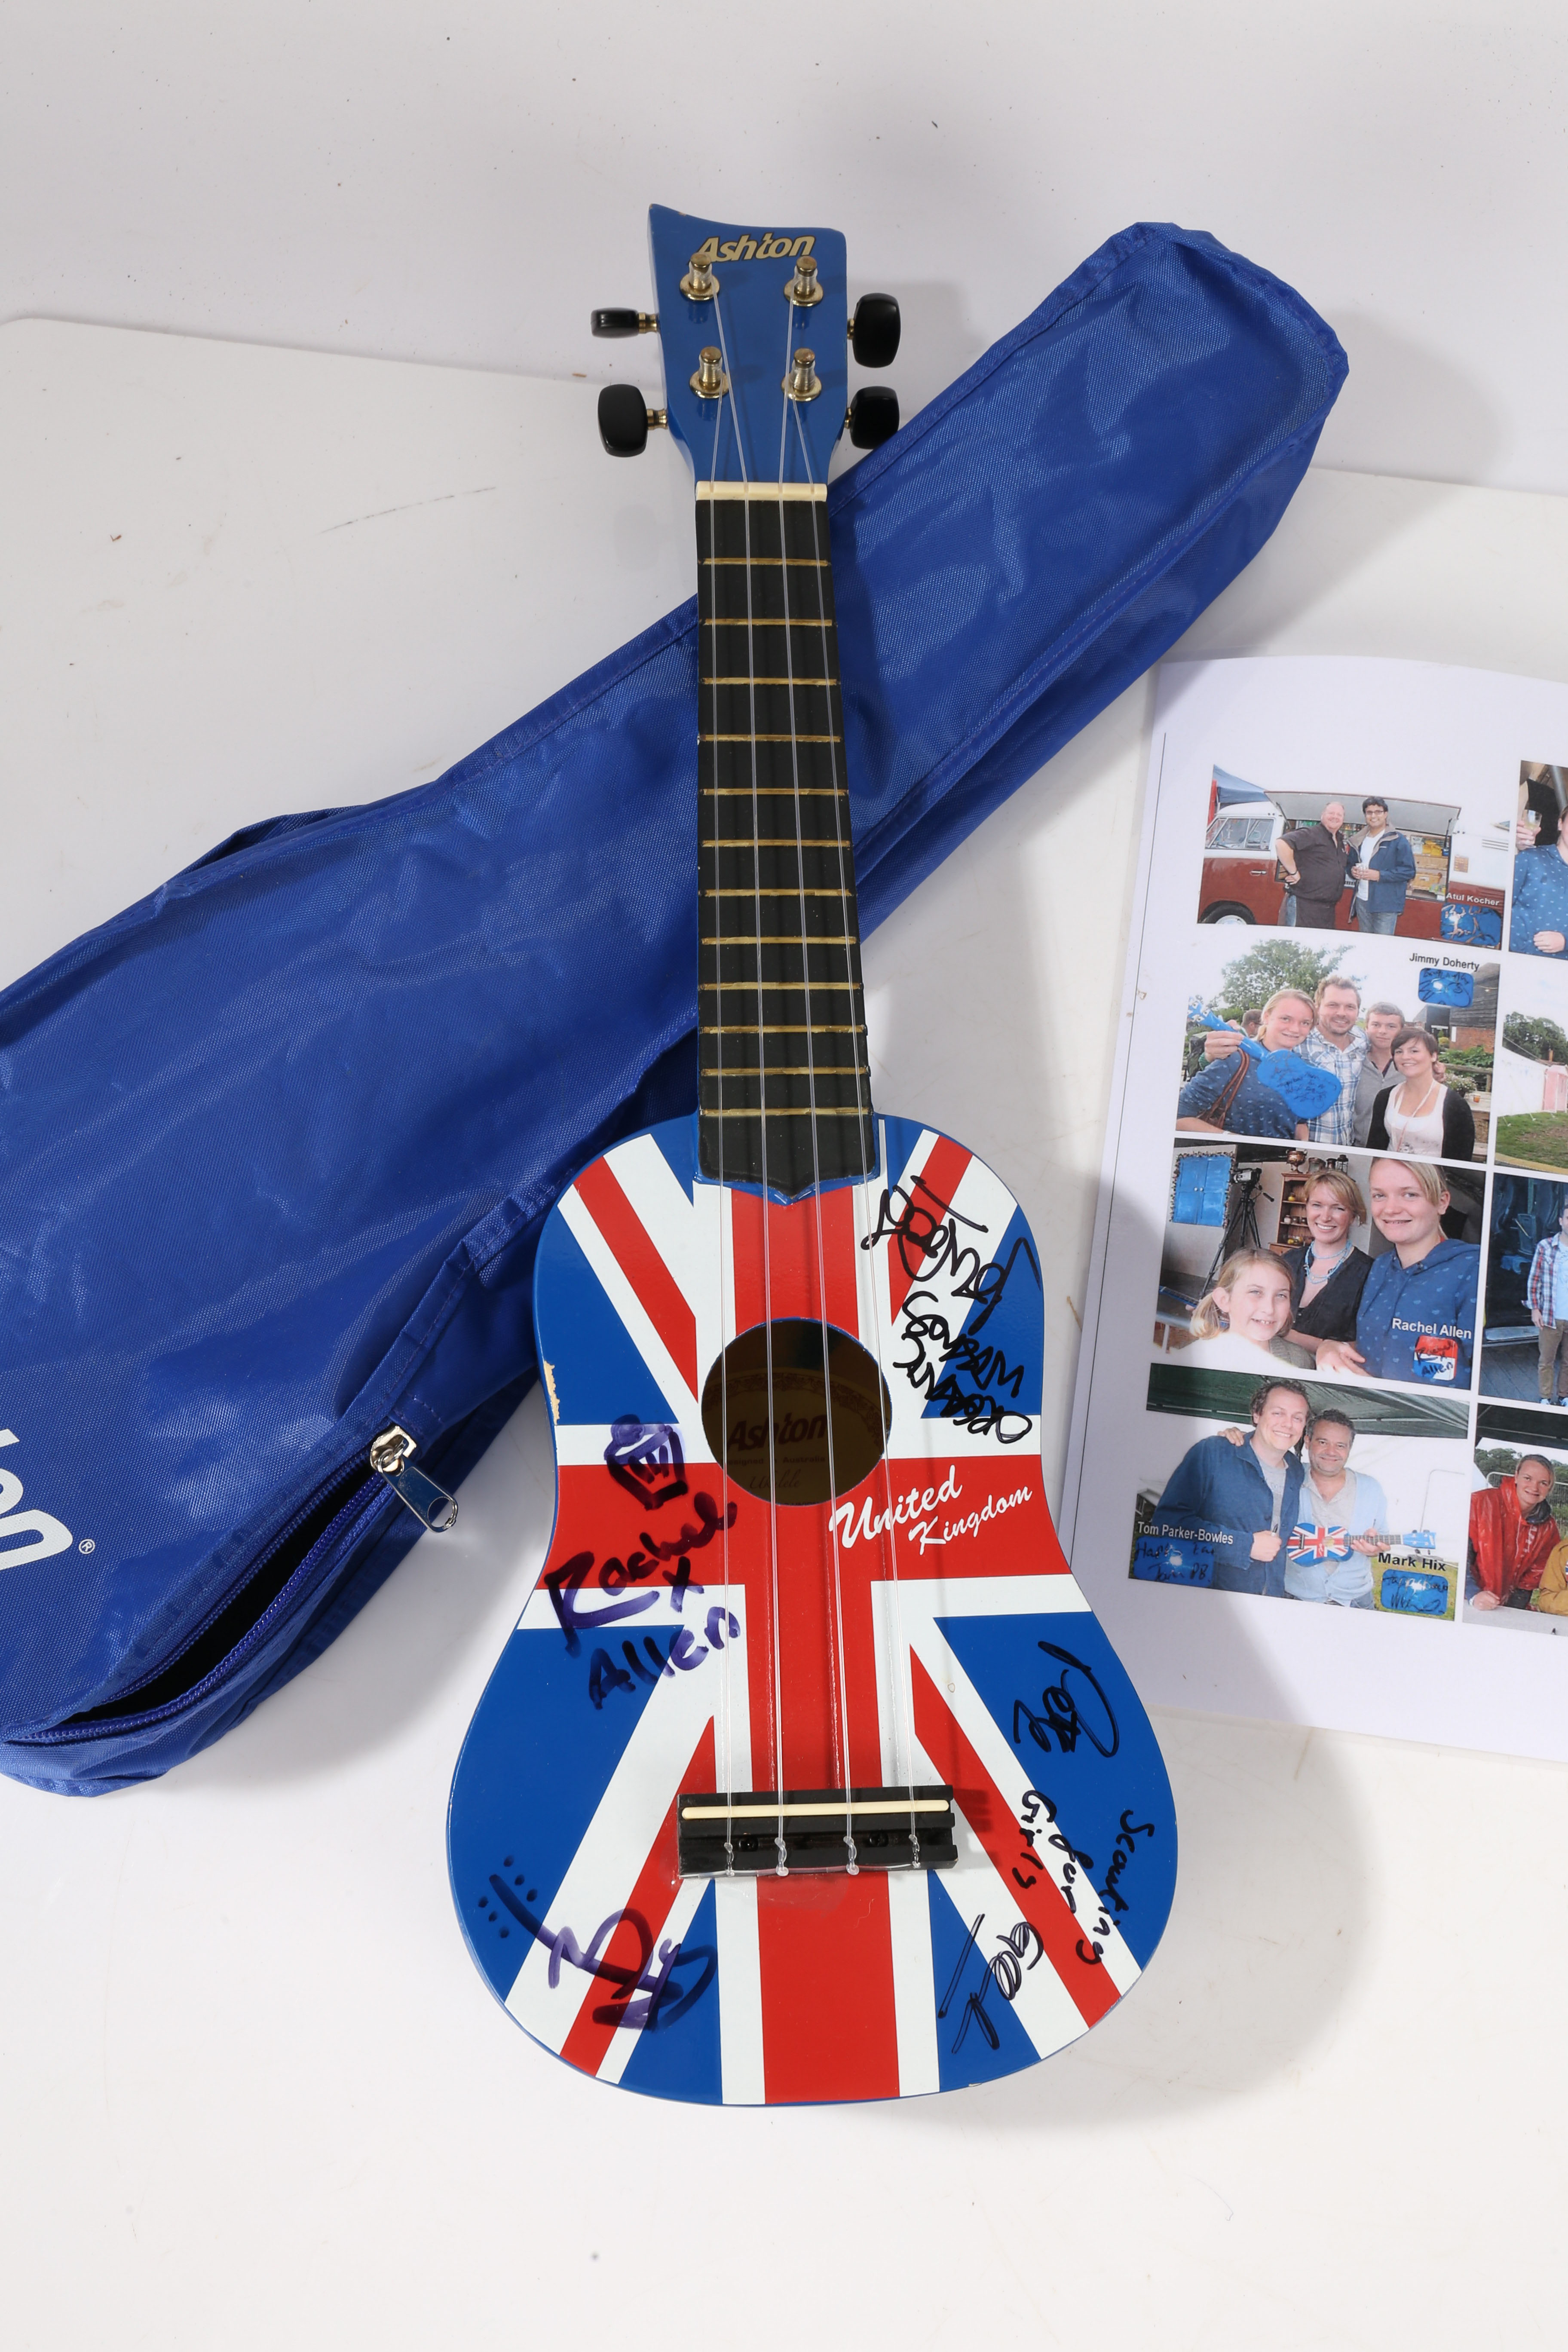 A Signed ukulele, the sigature were collected at Jimmy Farm Harvest Festival 2010, with signatures